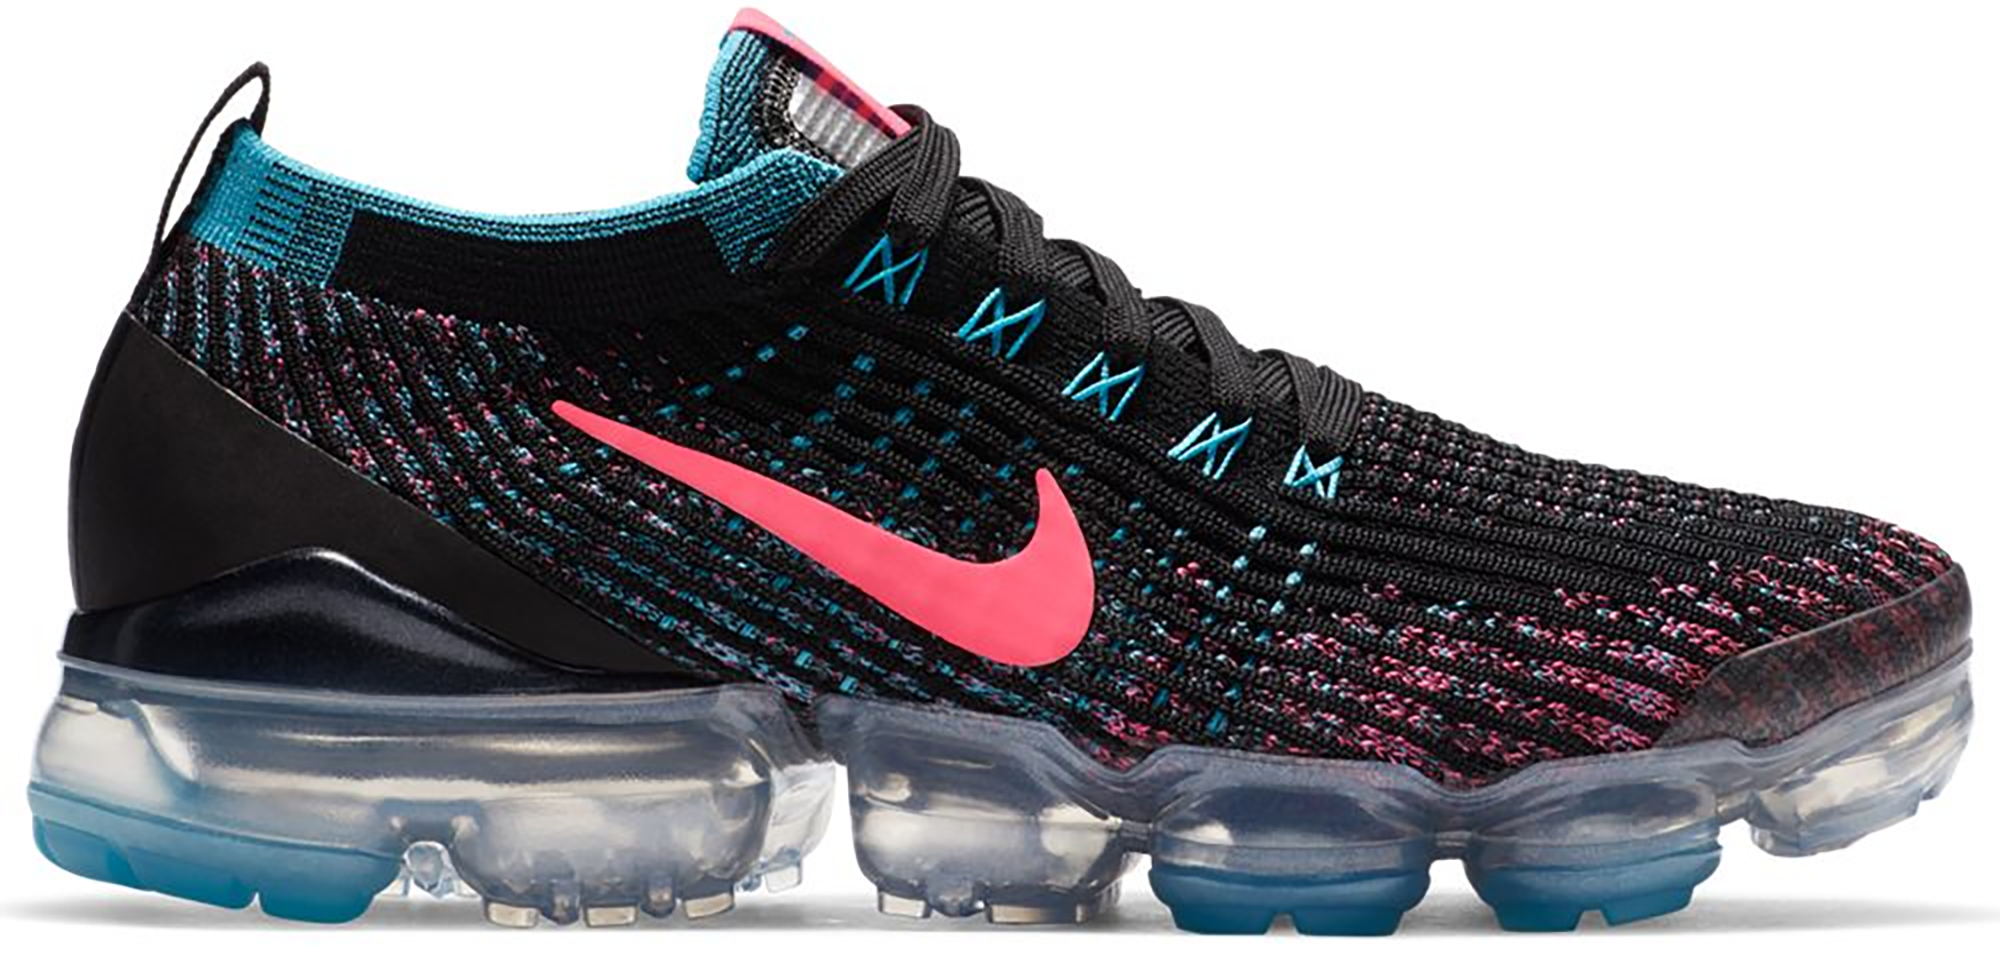 black white and pink vapormax